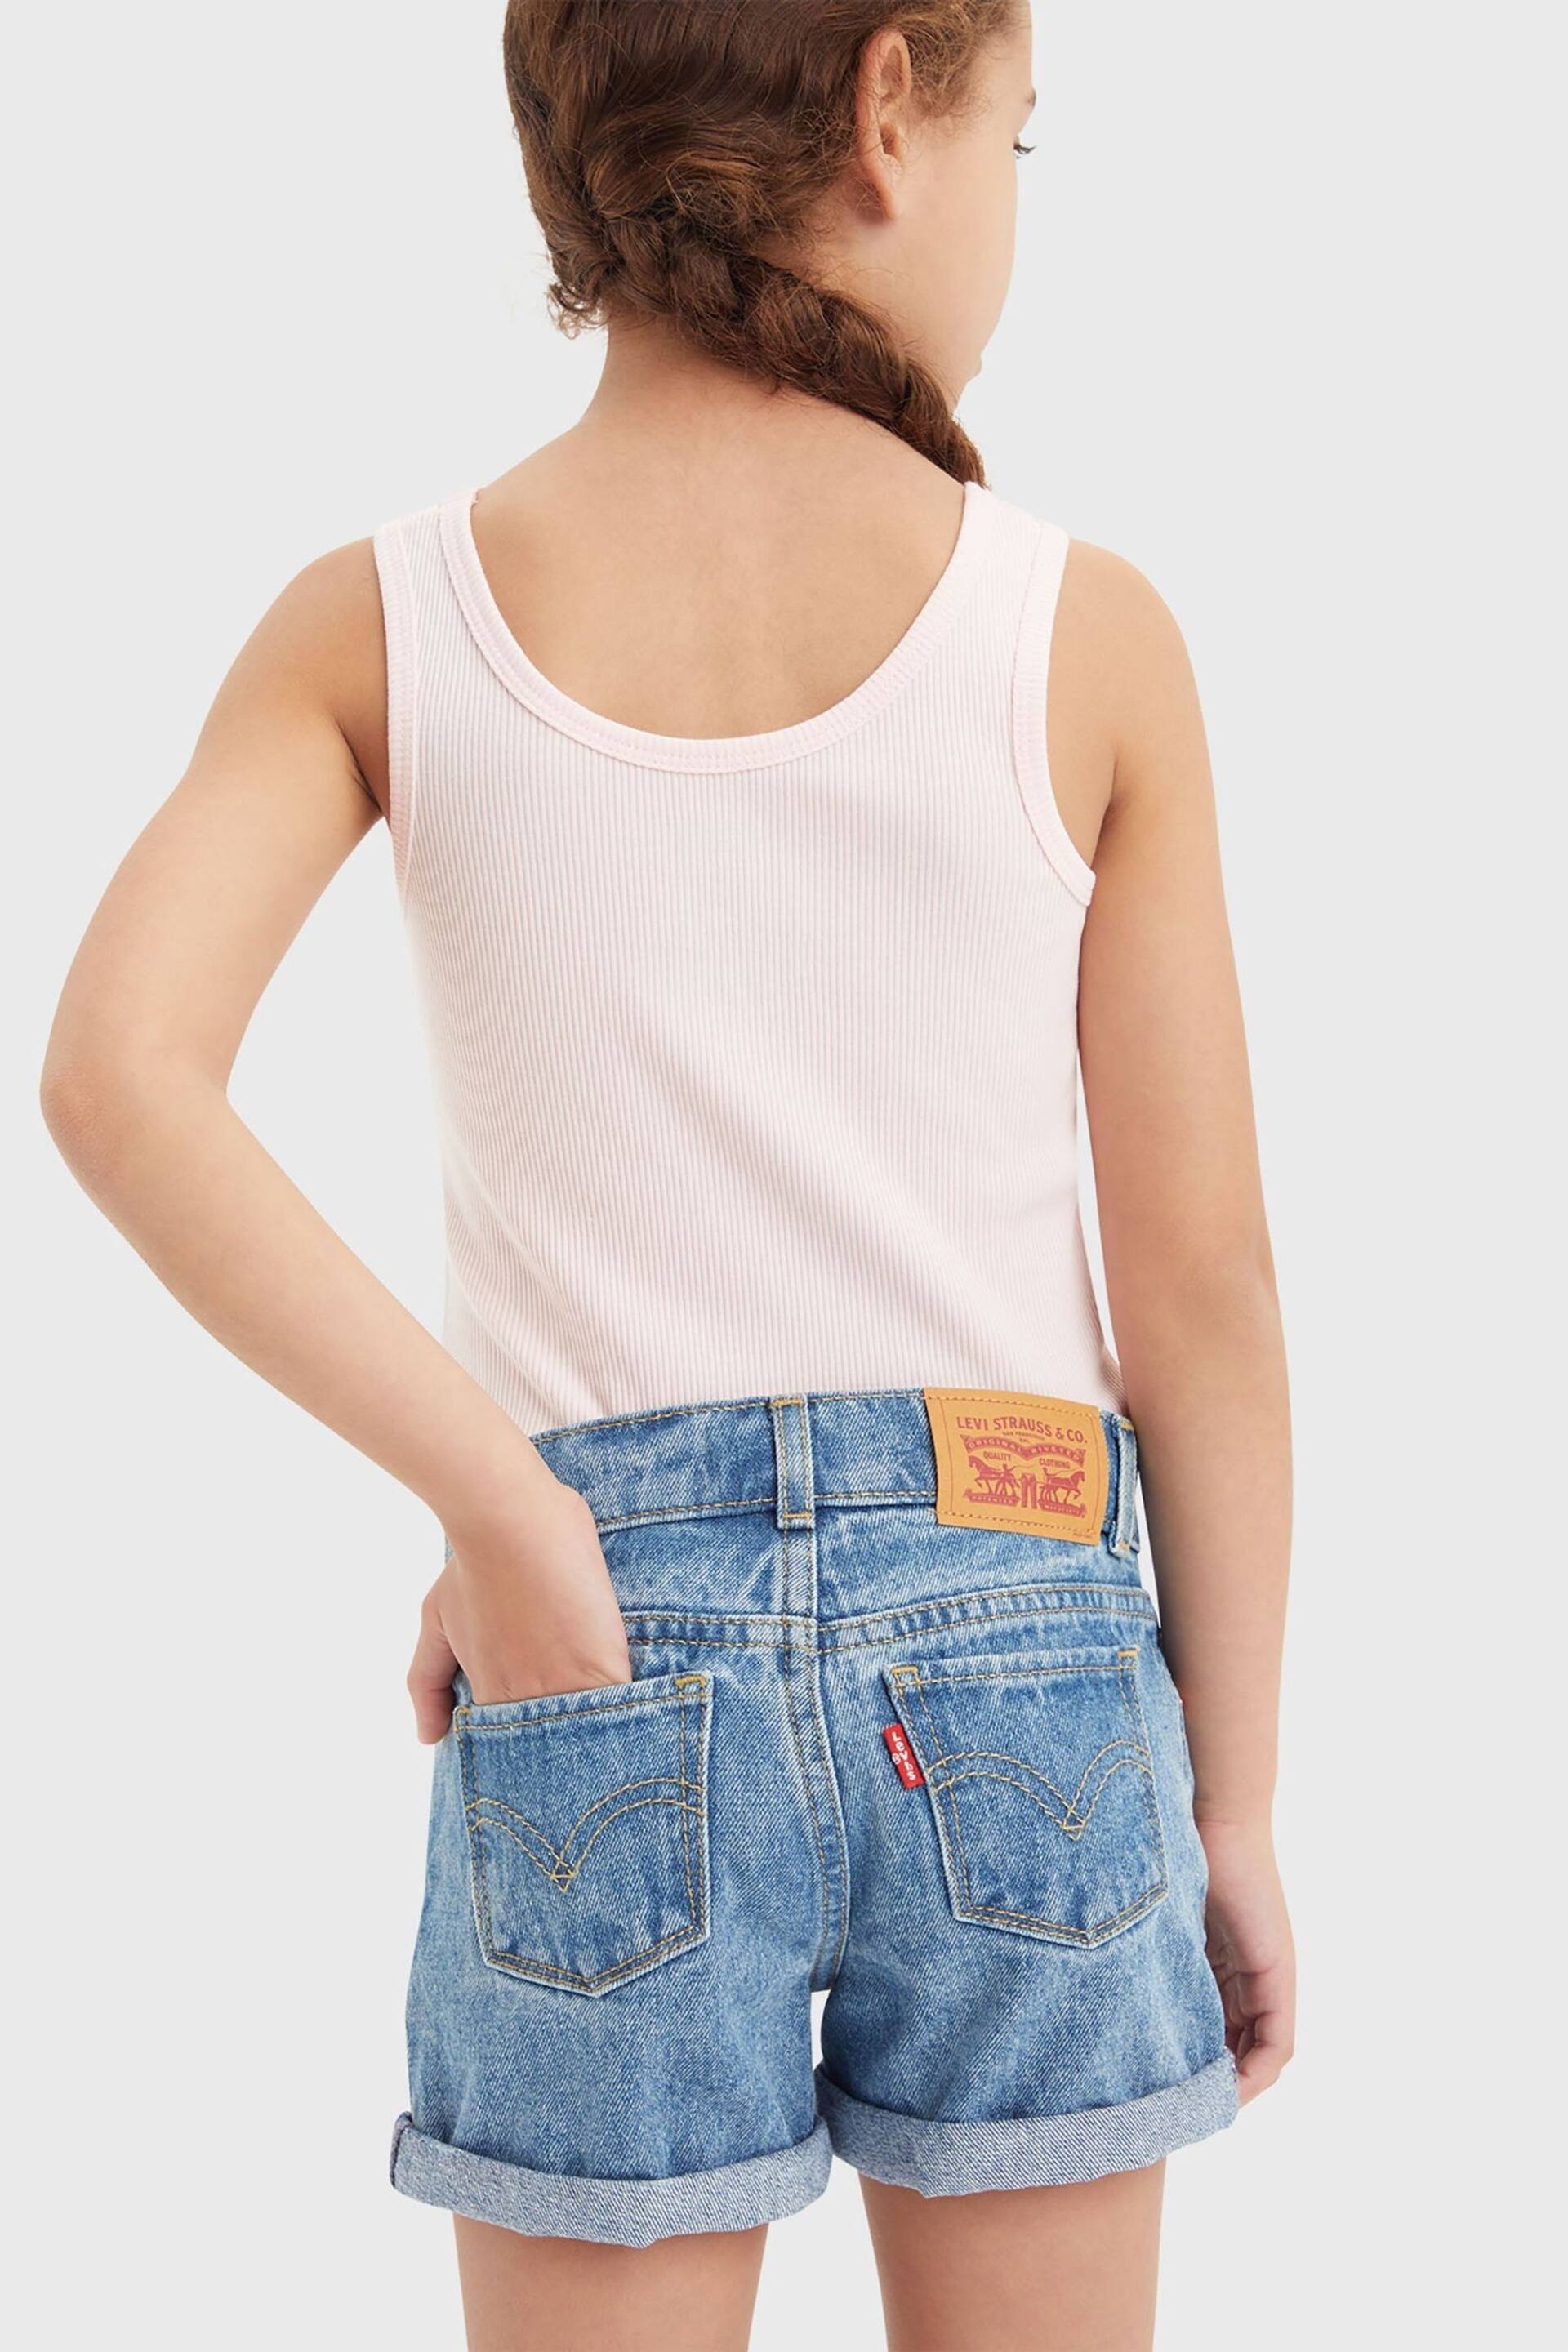 Levi's® Blue Light Mom Denim Shorts With Roll Cuff - Image 3 of 8